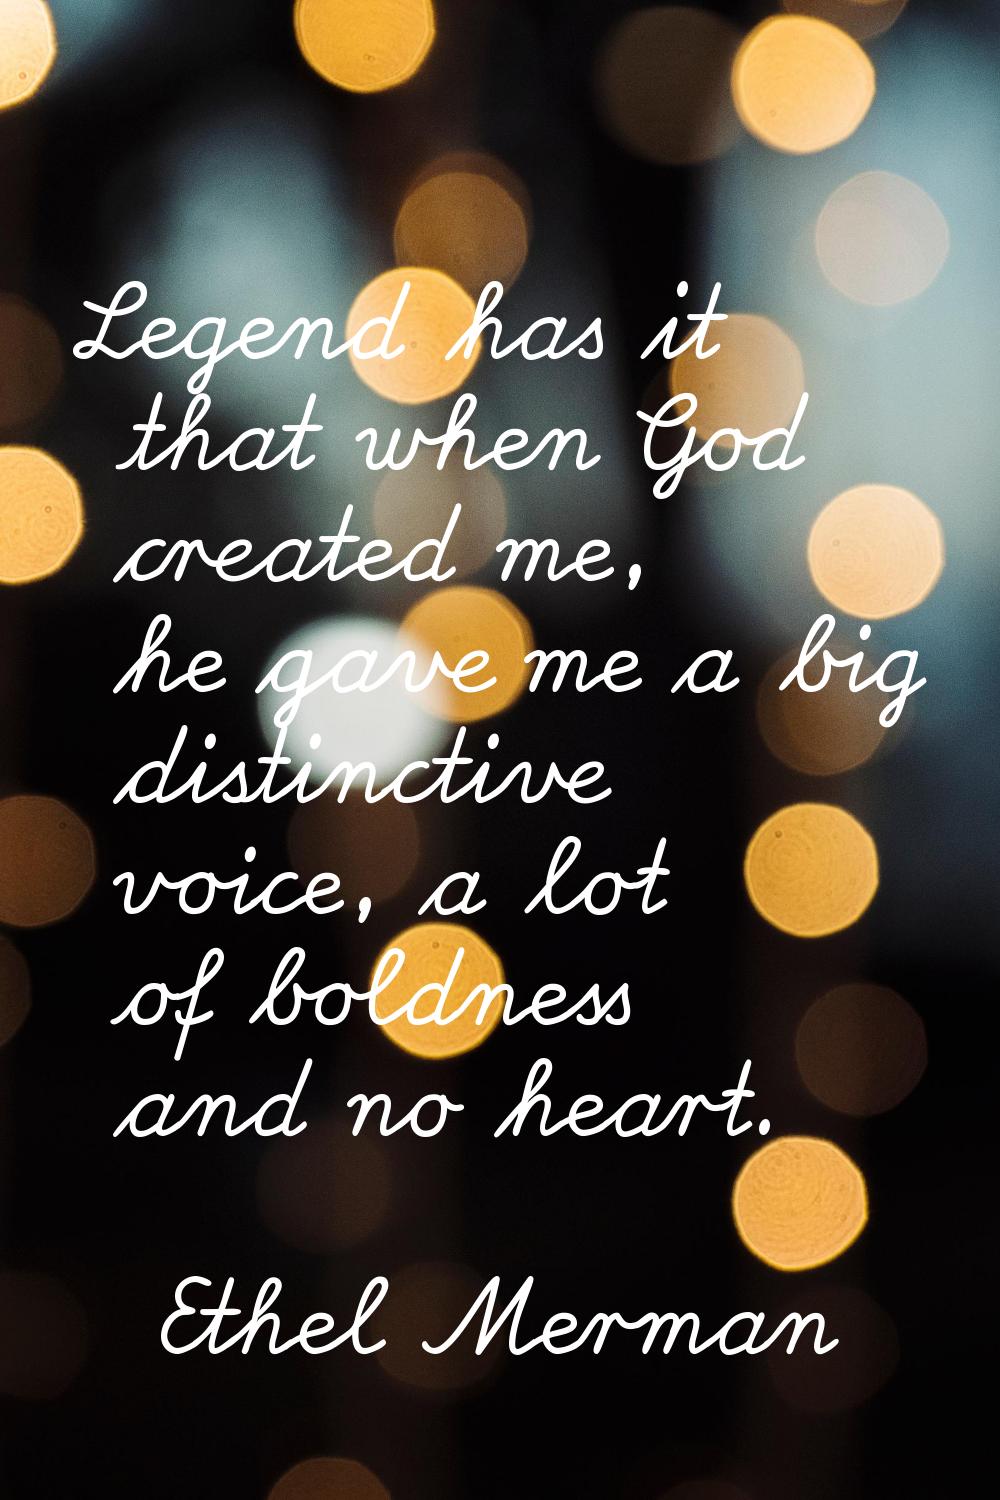 Legend has it that when God created me, he gave me a big distinctive voice, a lot of boldness and n